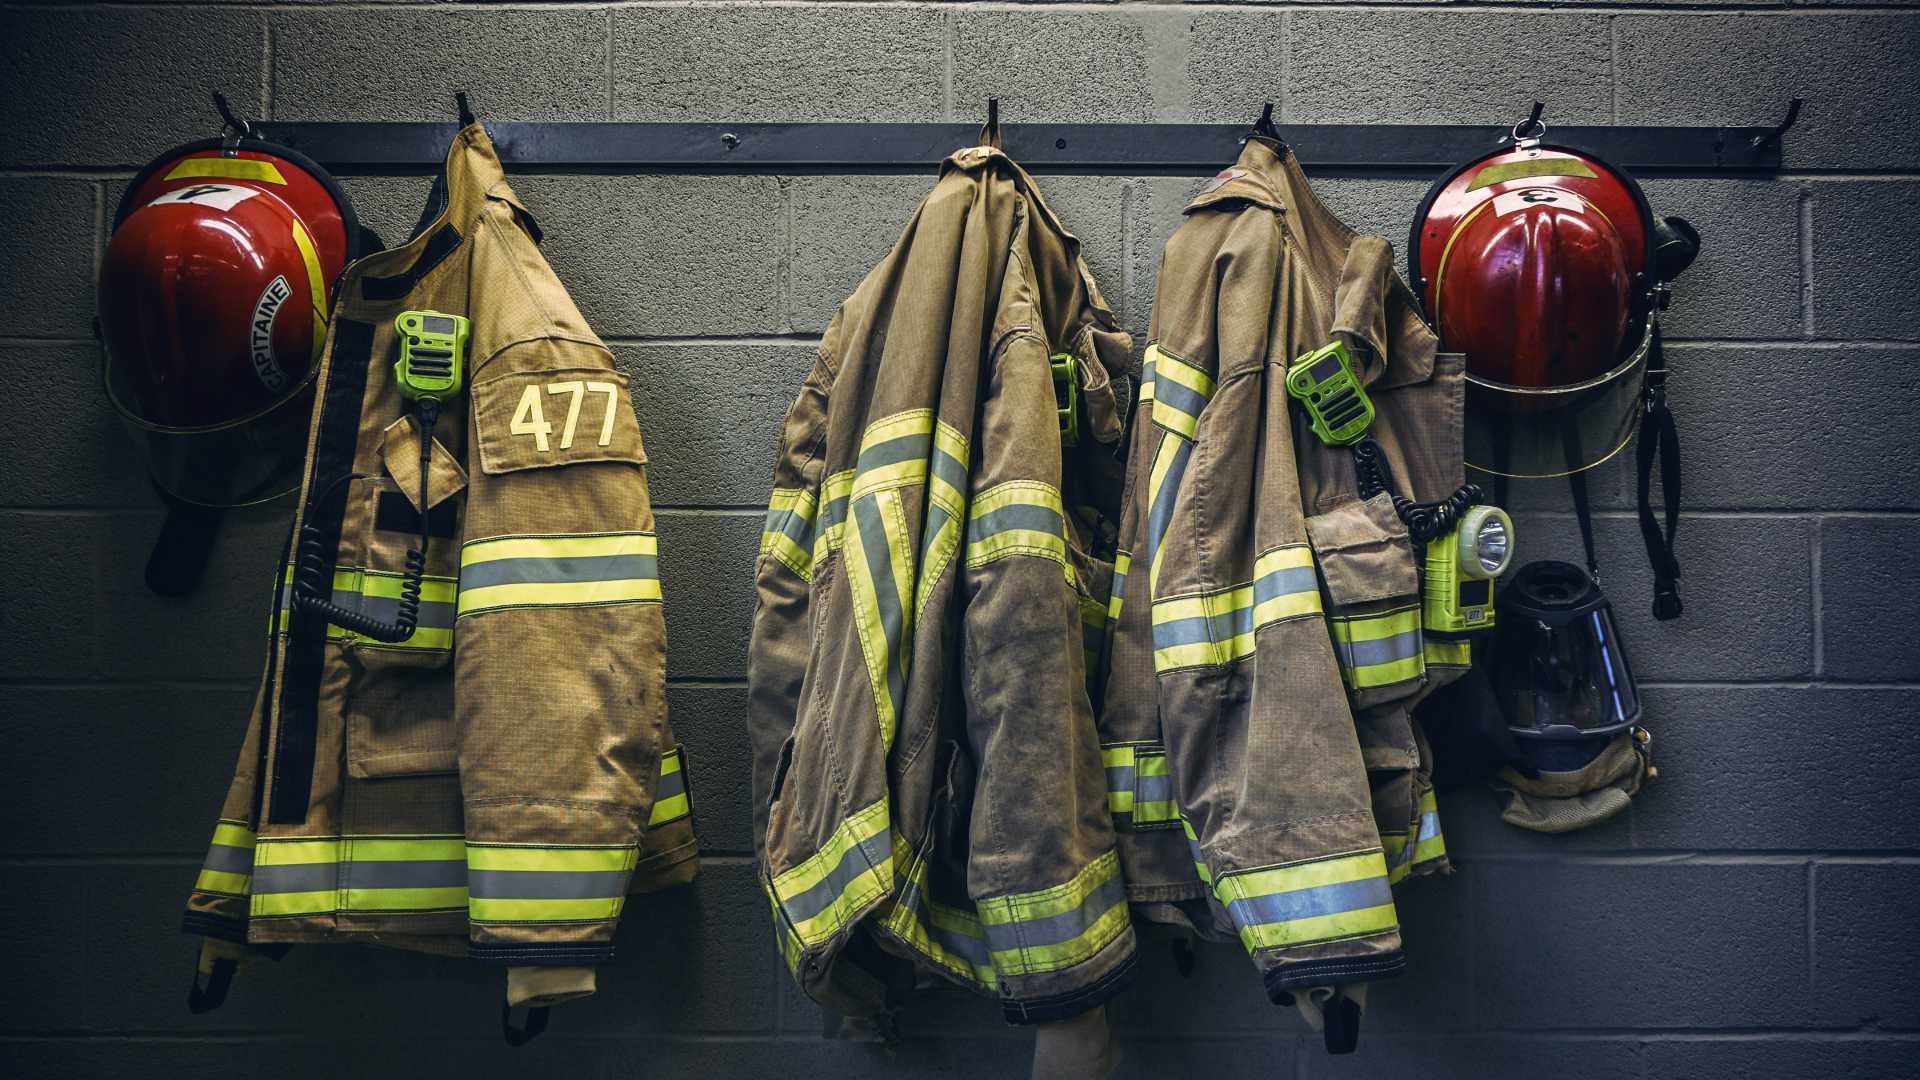 Three firefighter jackets hang alongside two red helmets on black hooks attached to a black cement wall.